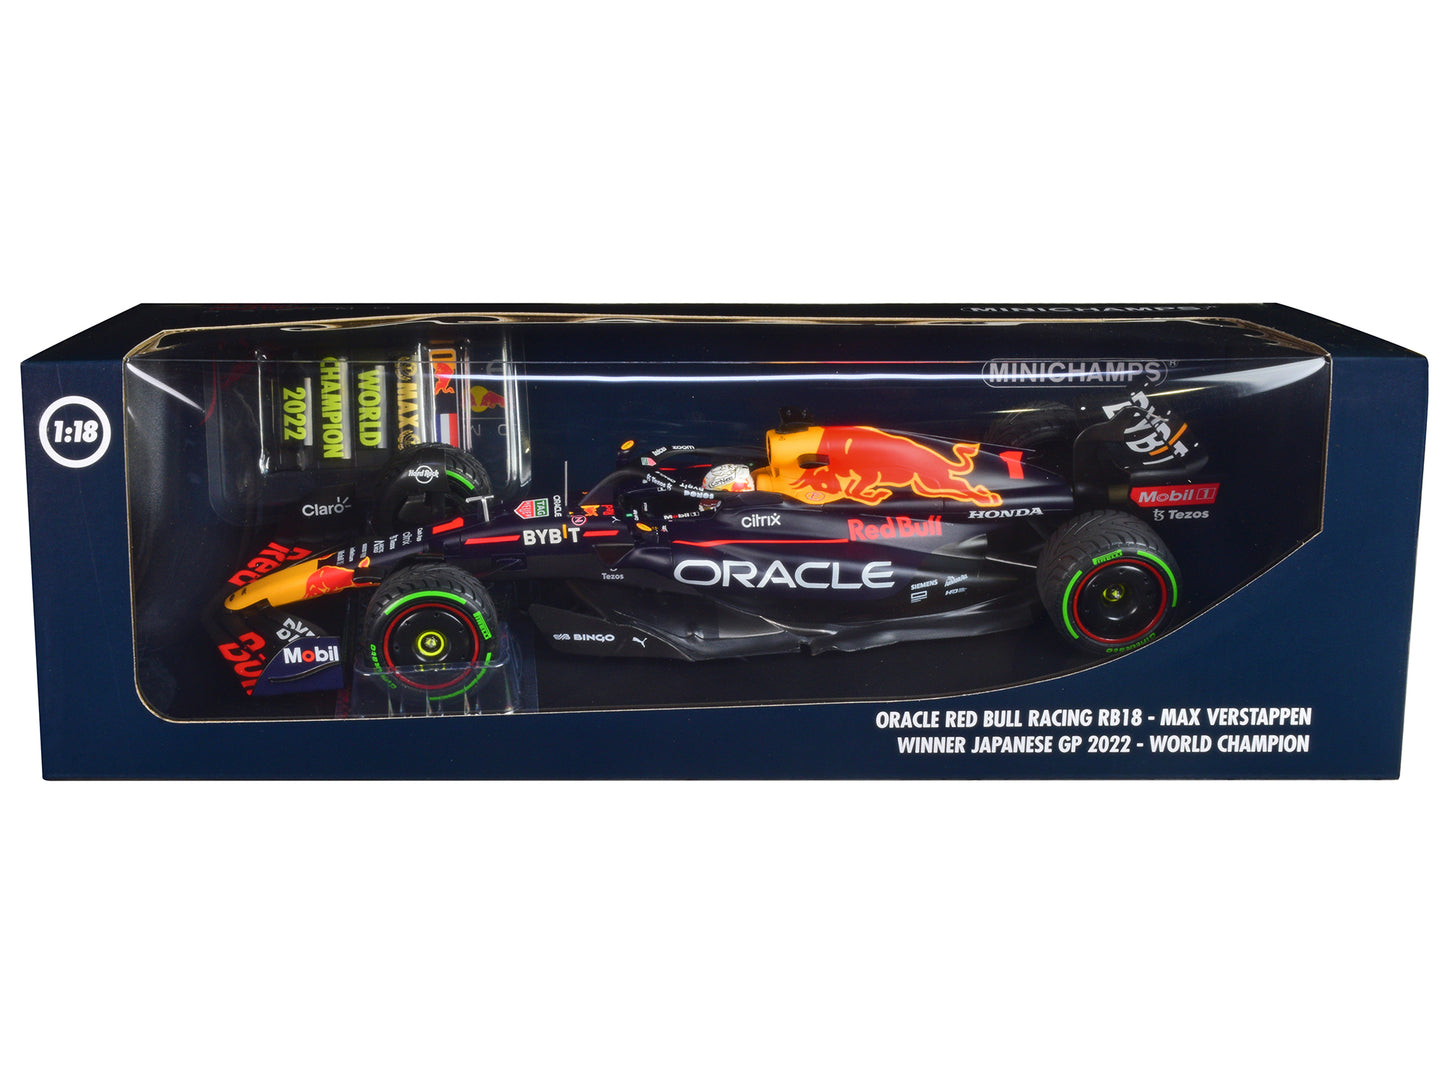 Red Bull Racing RB18 #1 Max Verstappen "Oracle" Winner F1 Formula One "Japanese GP" (2022) with Driver and World Champion Pit Board Limited Edition to 1602 pieces Worldwide 1/18 Diecast Model Car by Minichamps